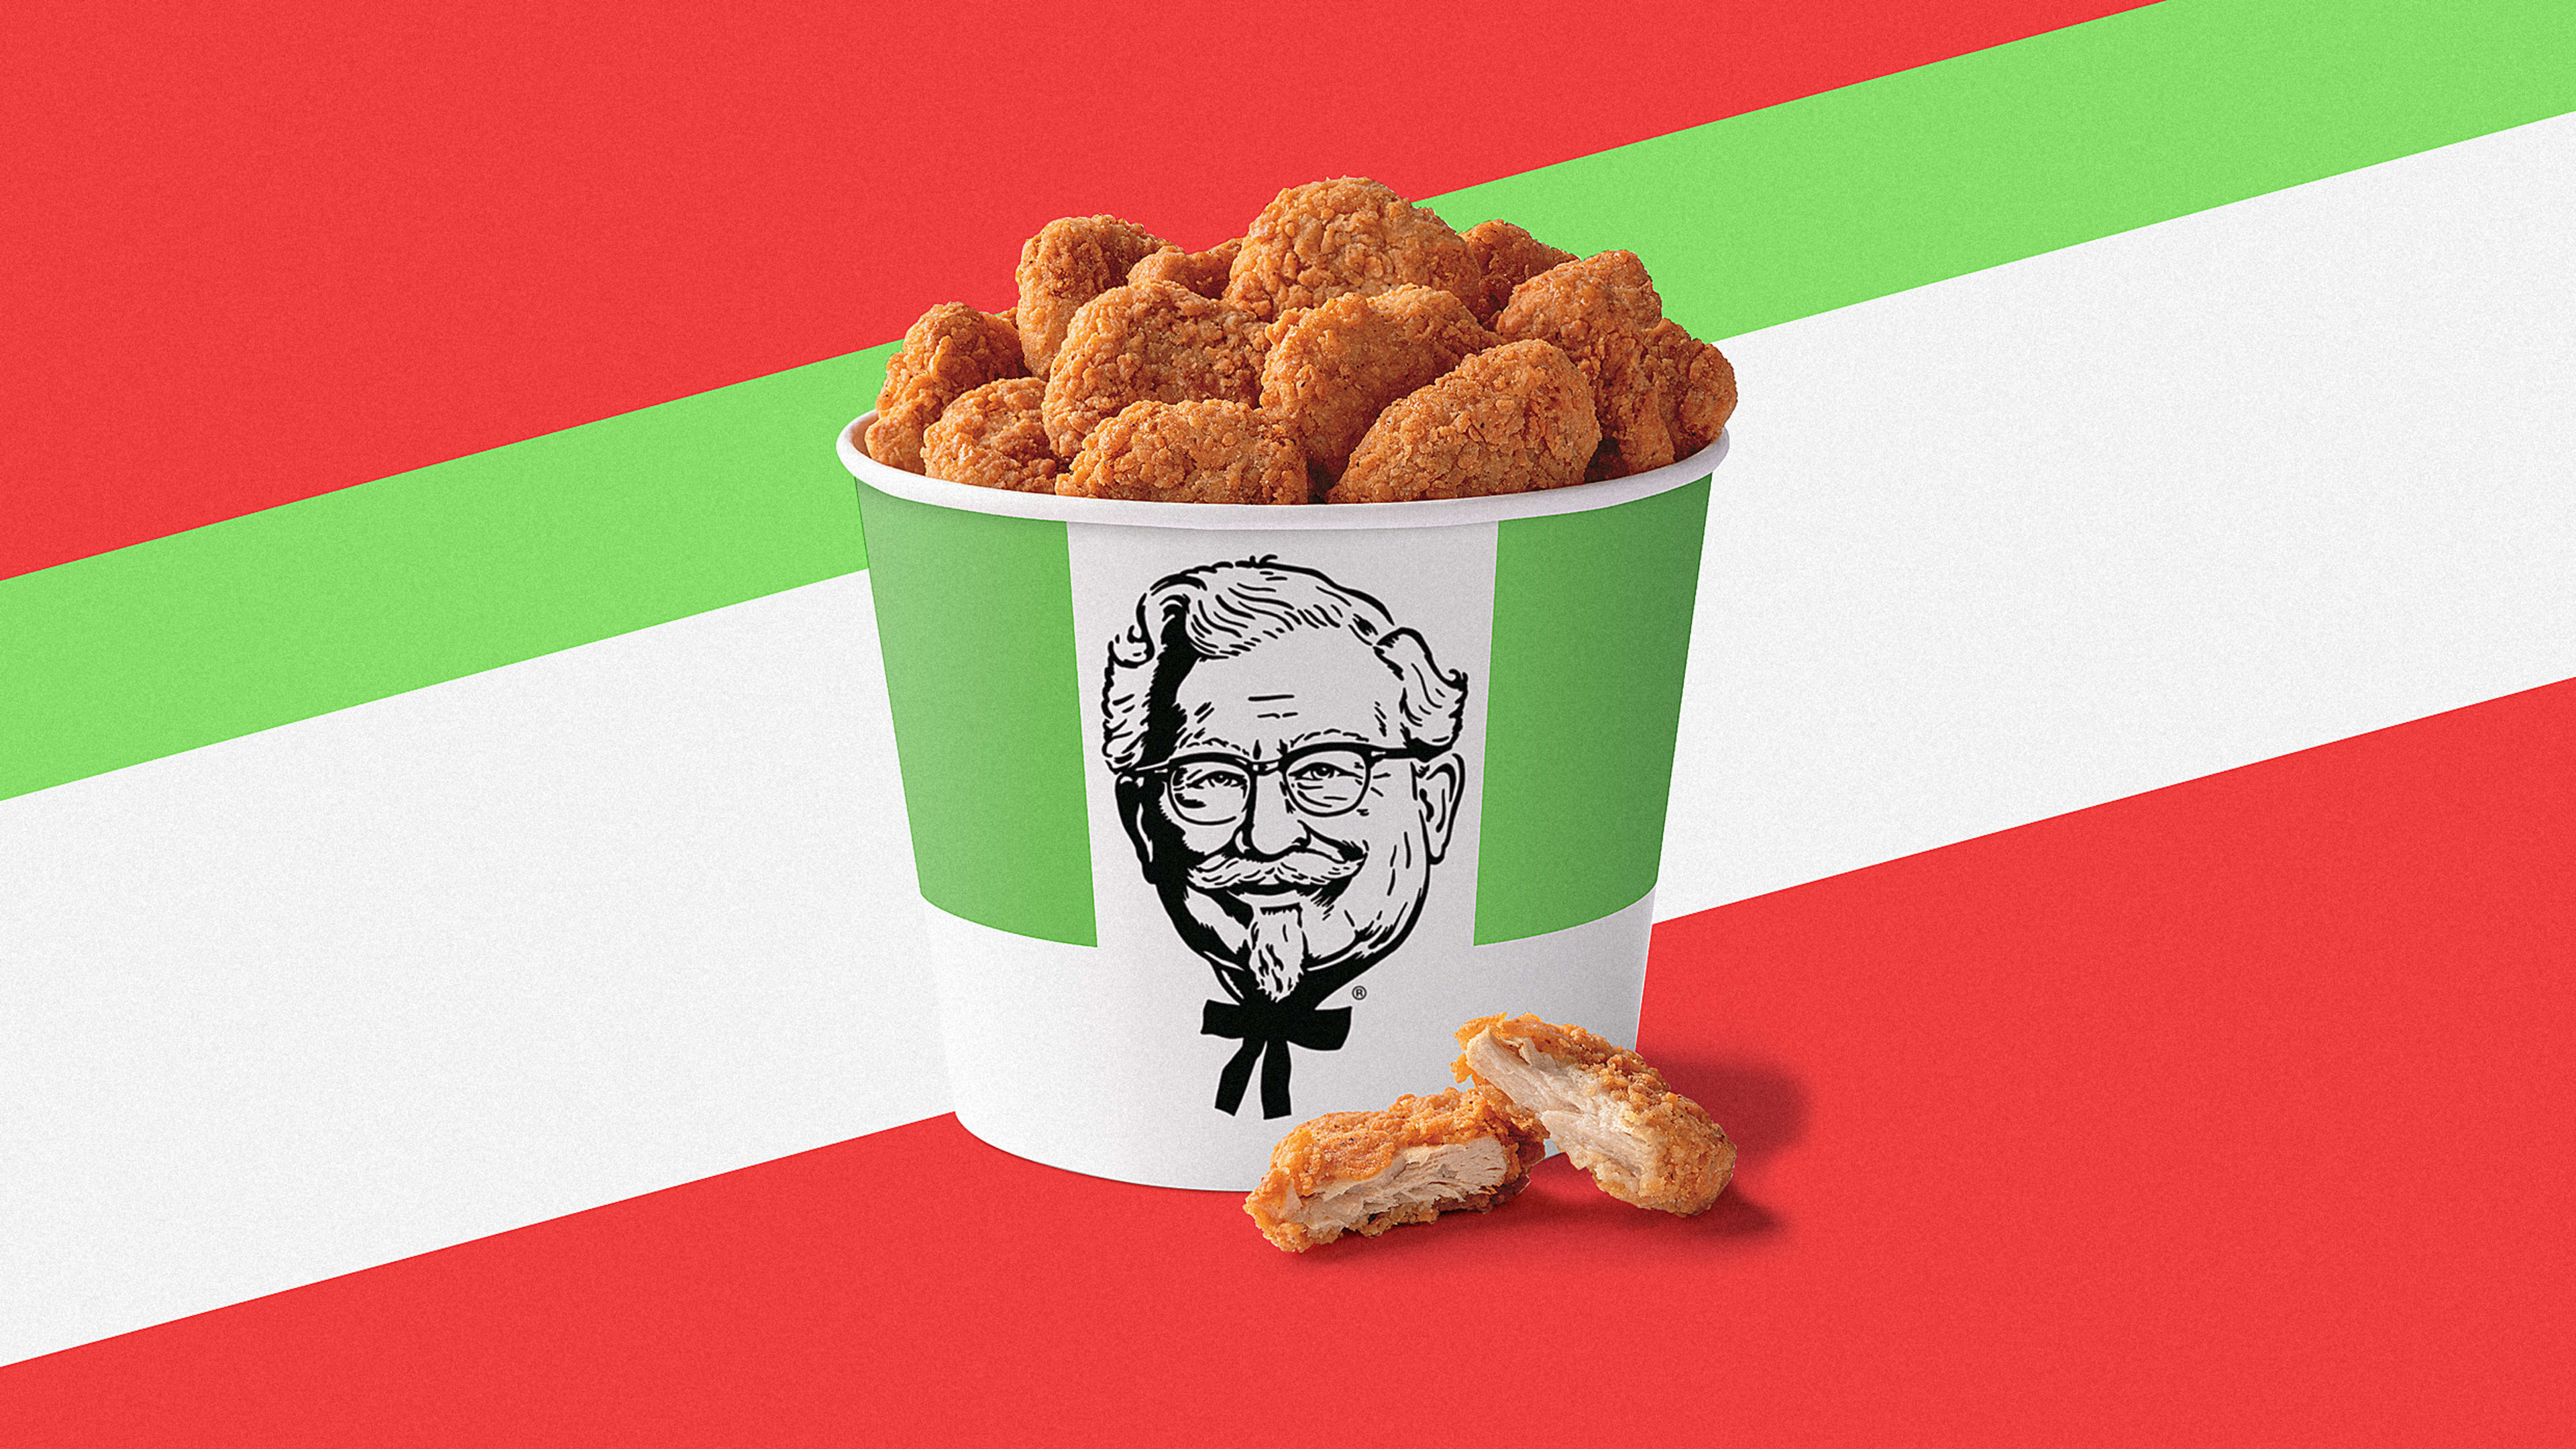 KFC’s Beyond Meat chicken is a damn miracle